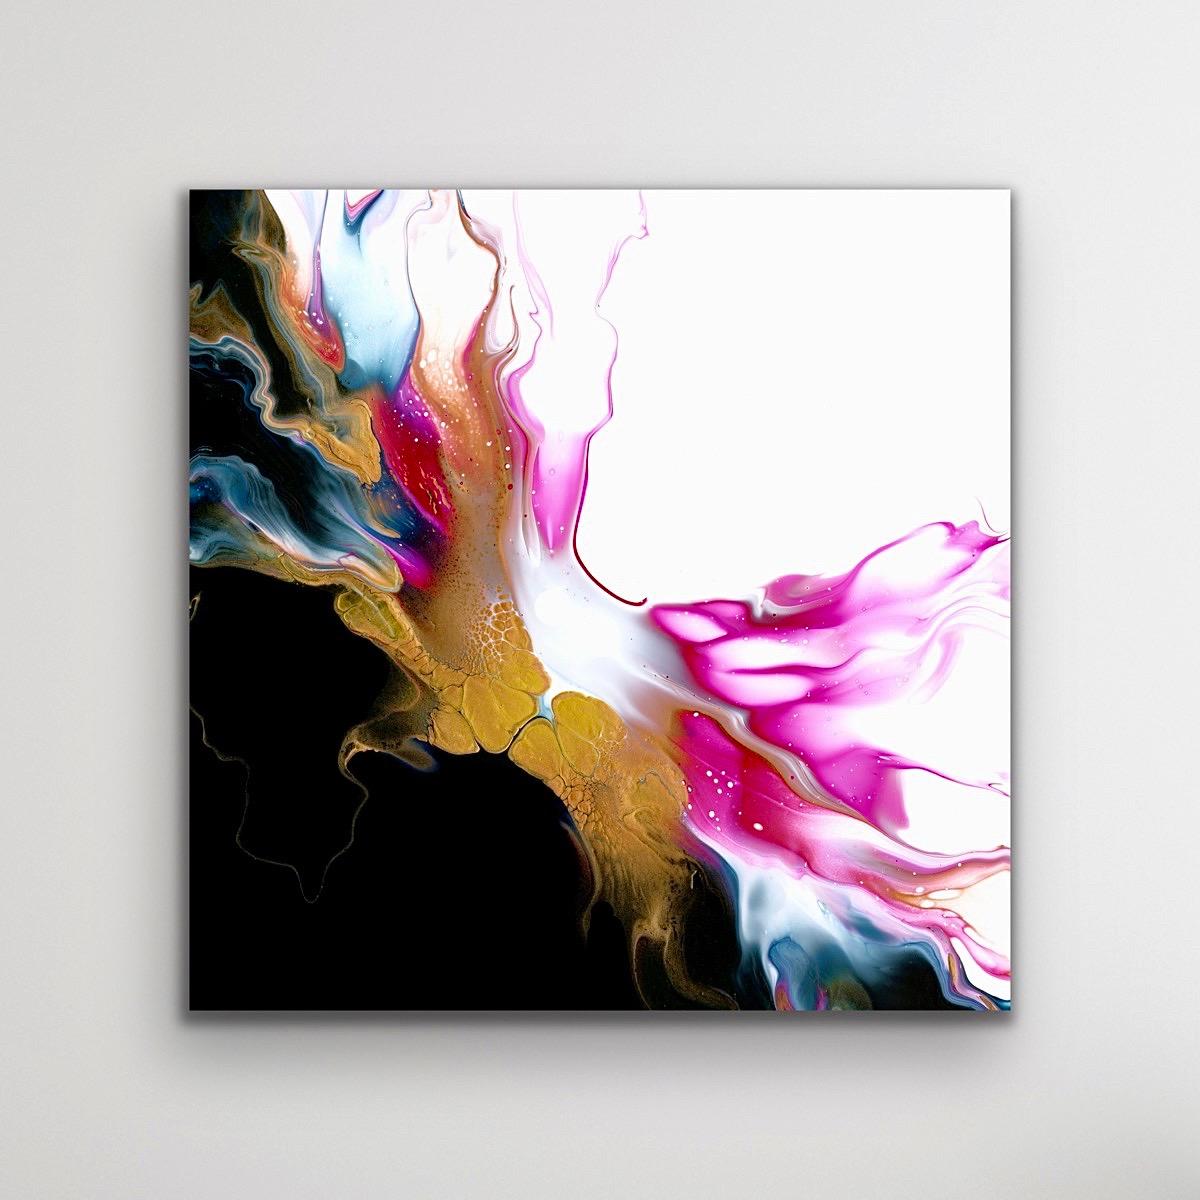 This contemporary modern abstract painting is printed on a lightweight metal composite and comes ready to hang. This vibrant composition can be hung both indoor and outdoor as it is weather resistant.

-Title: Resurgence
-Artist: Celeste